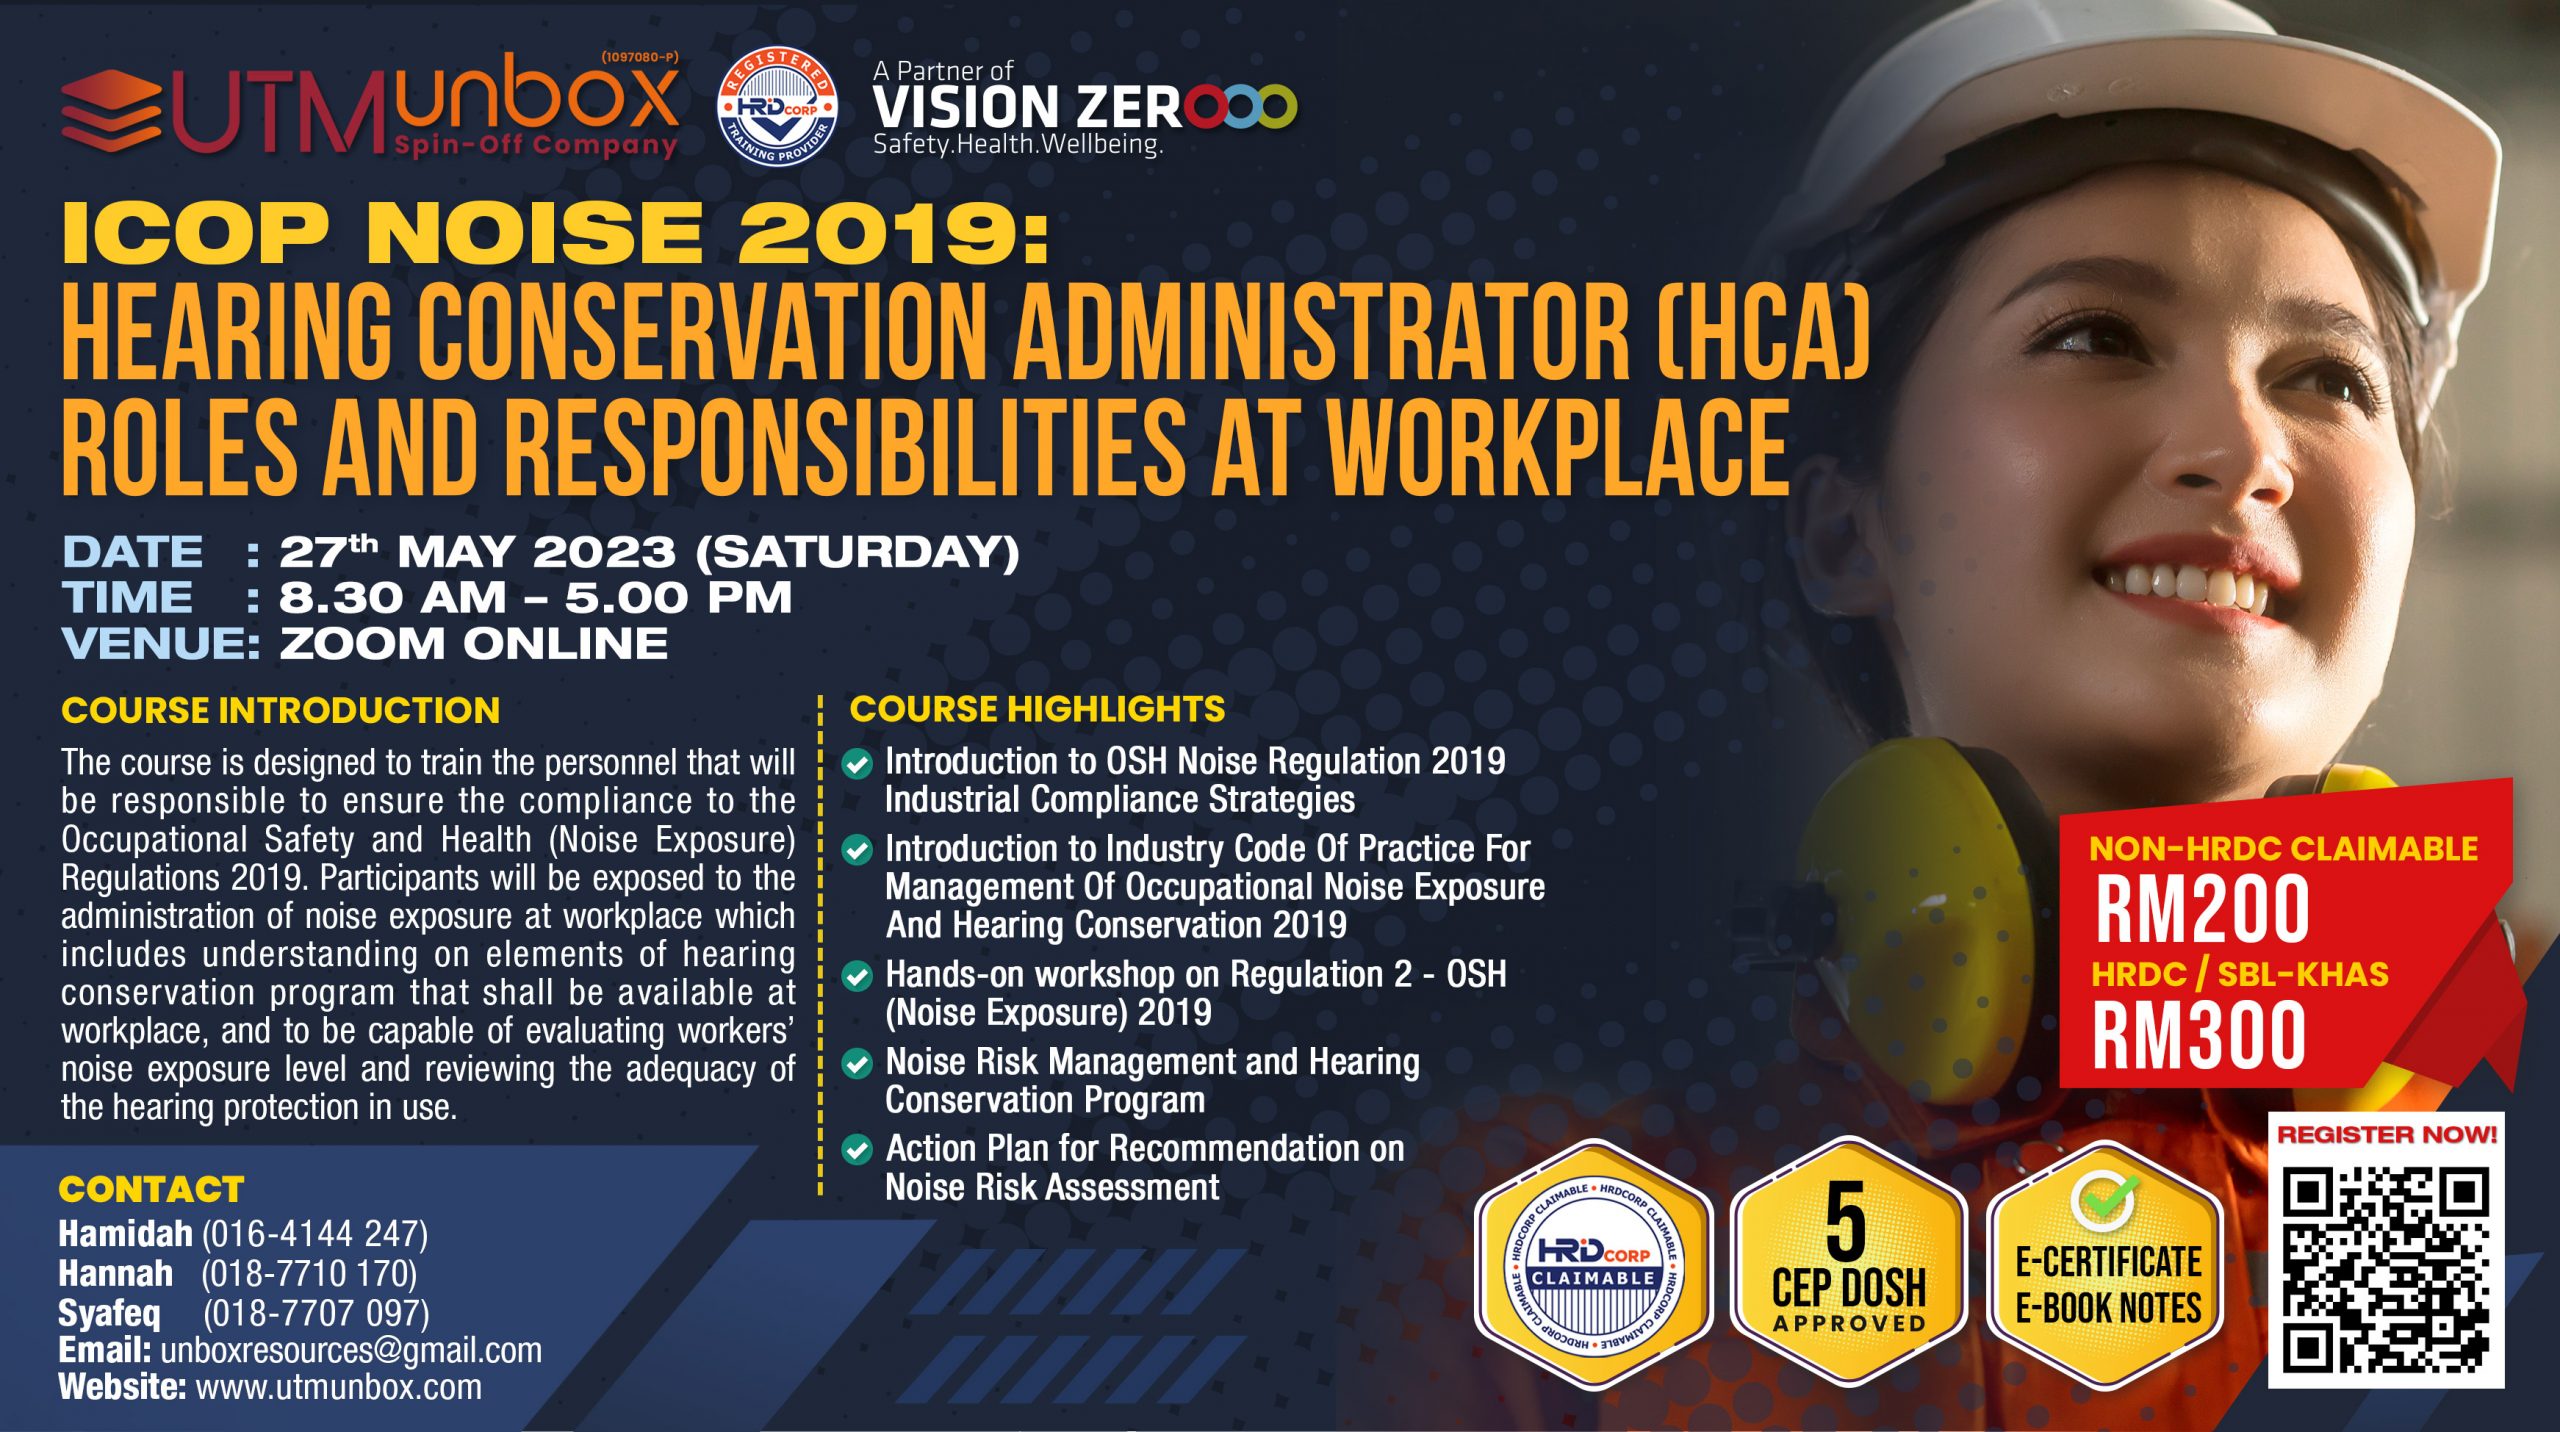 You are currently viewing HEARING CONSERVATION ADMINISTRATOR (HCA) ROLES AND RESPONSIBILITIES AT WORKPLACE